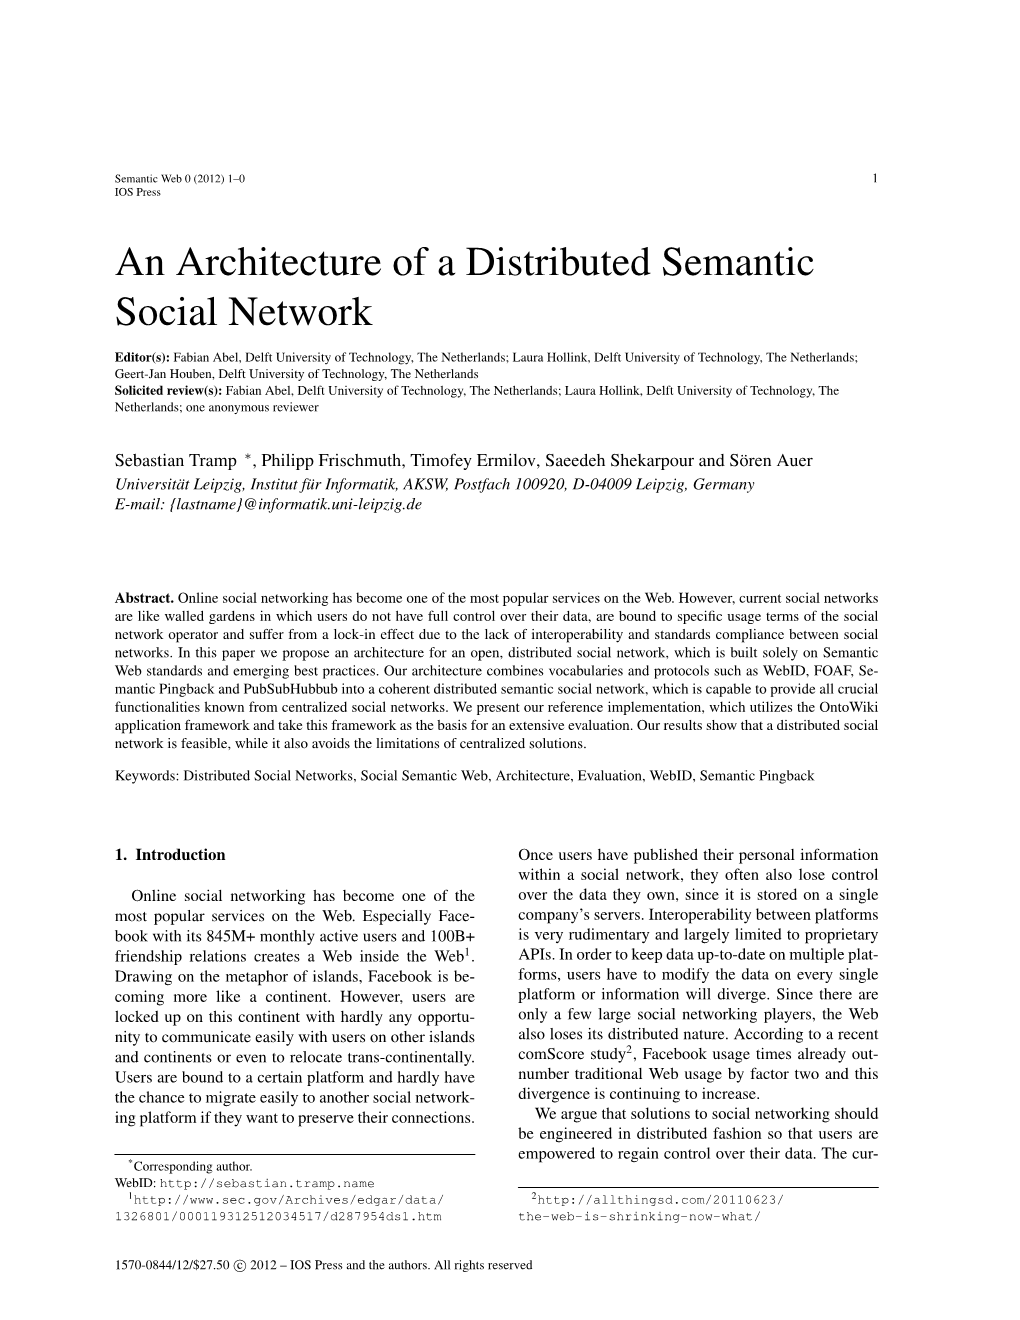 An Architecture of a Distributed Semantic Social Network